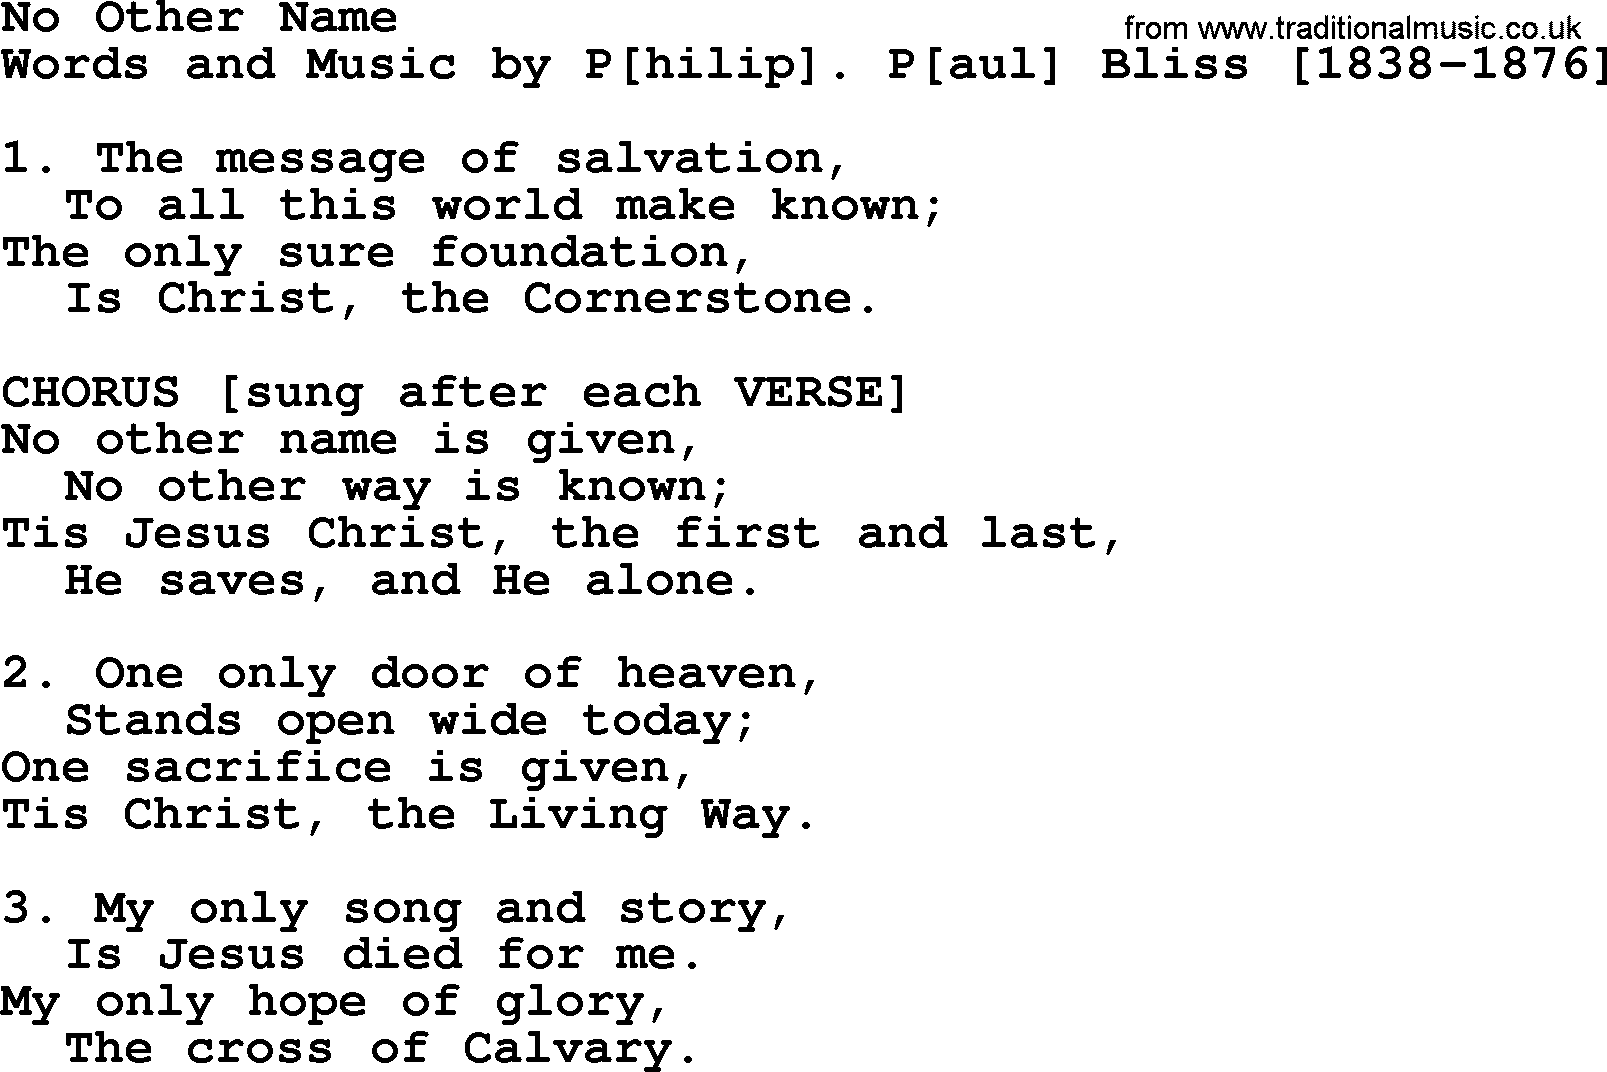 Philip Bliss Song: No Other Name, lyrics